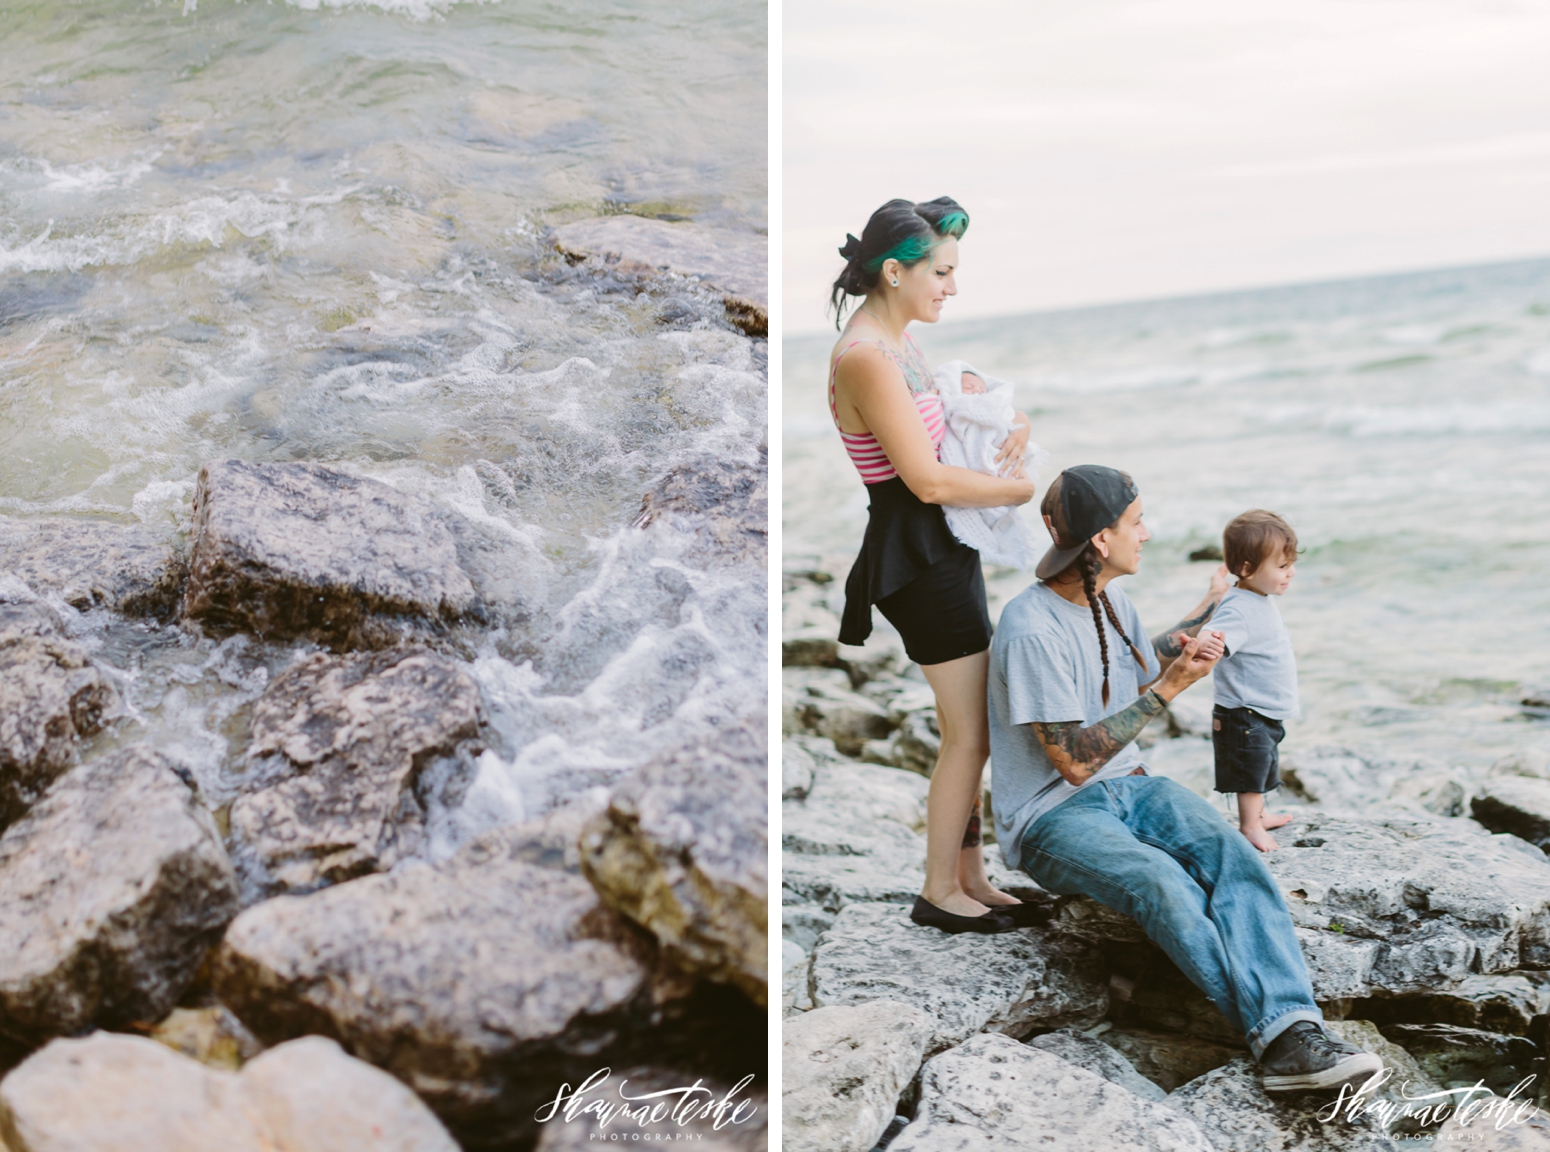 shaunae_teske_wisconsin_photographer_family-cave-point-door-county-wolfgang-symphony-46